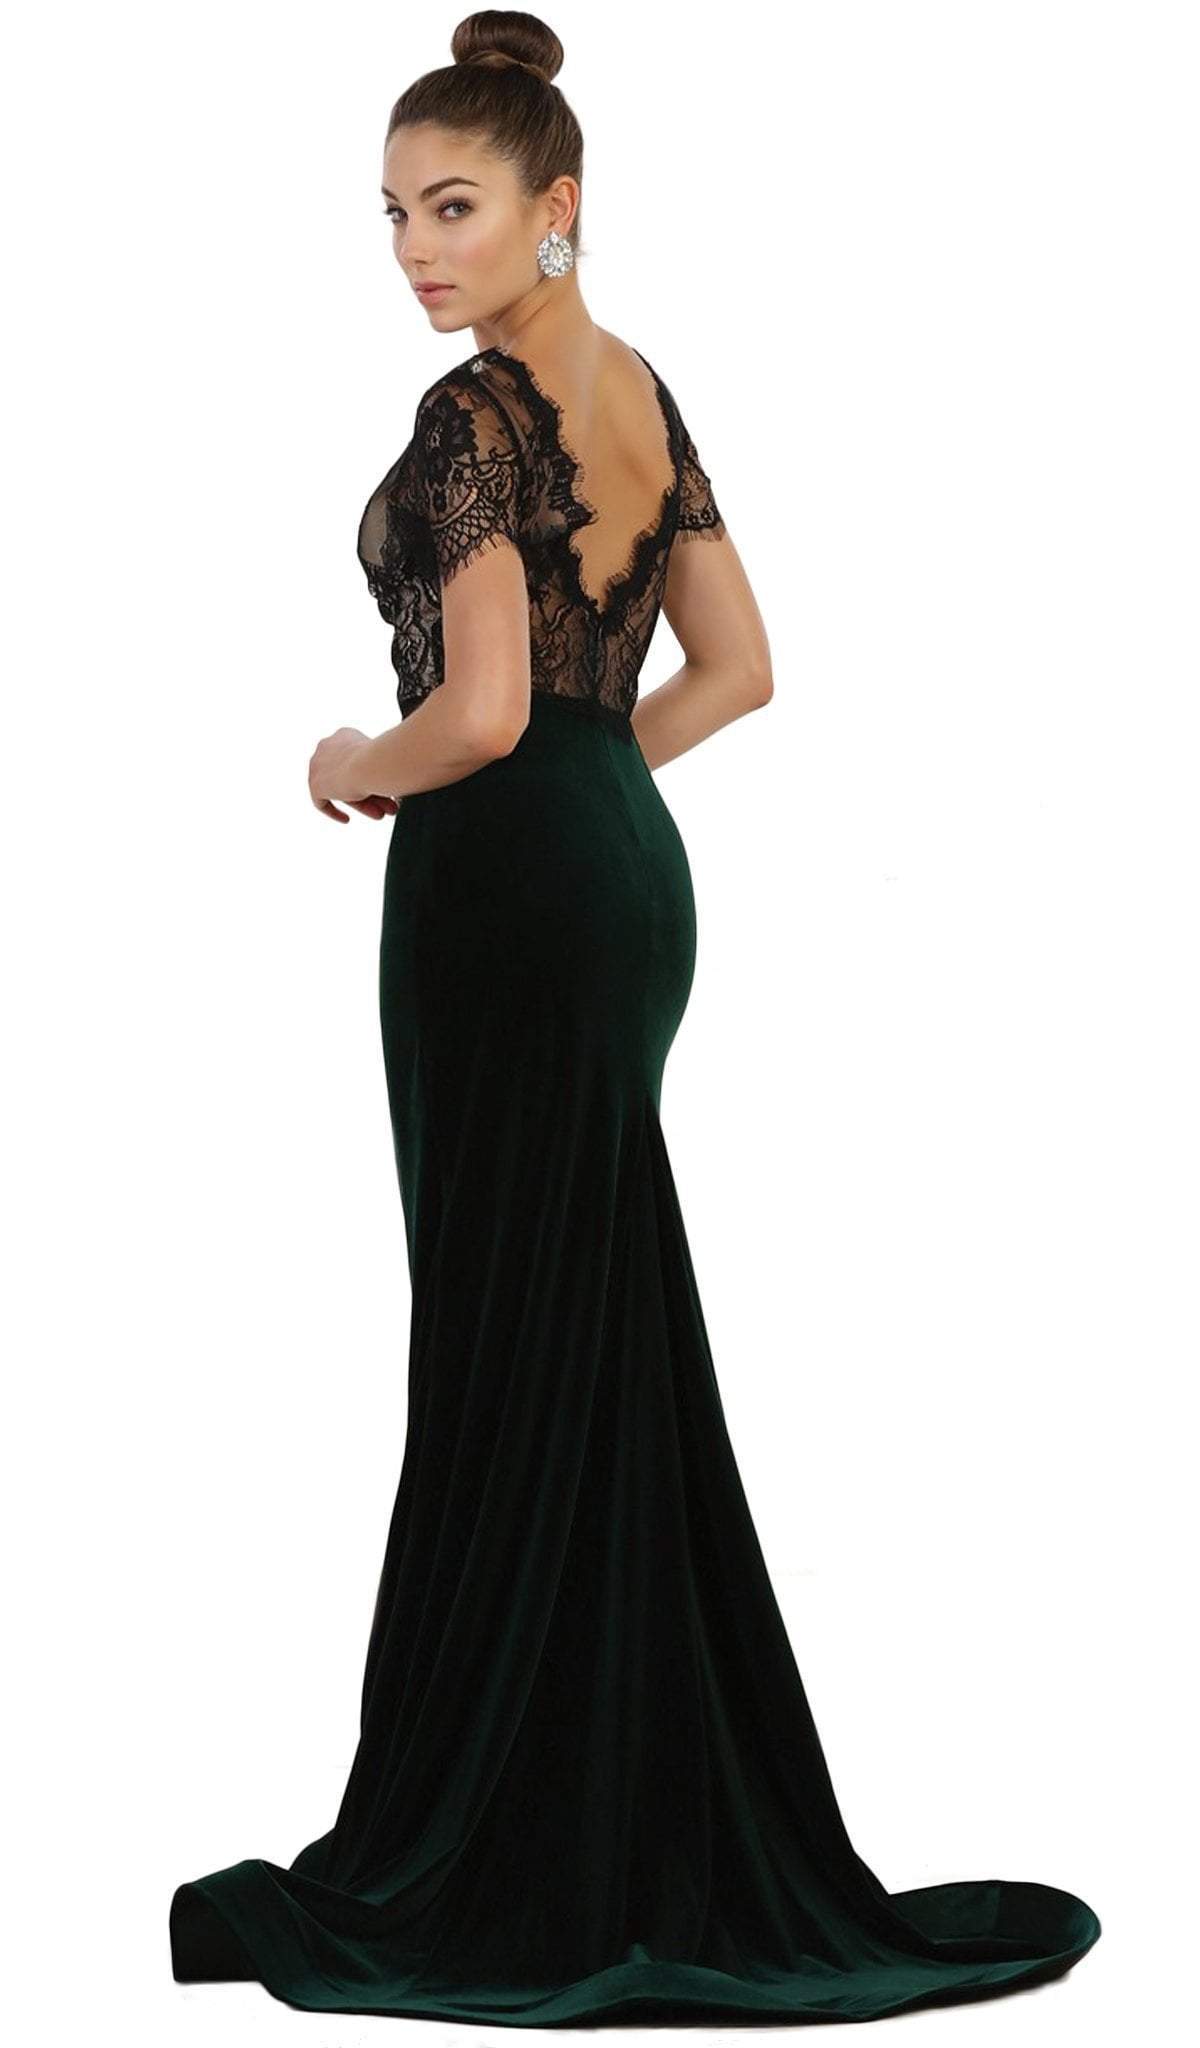 May Queen - Lace Bateau Sheath Evening Dress Special Occasion Dress